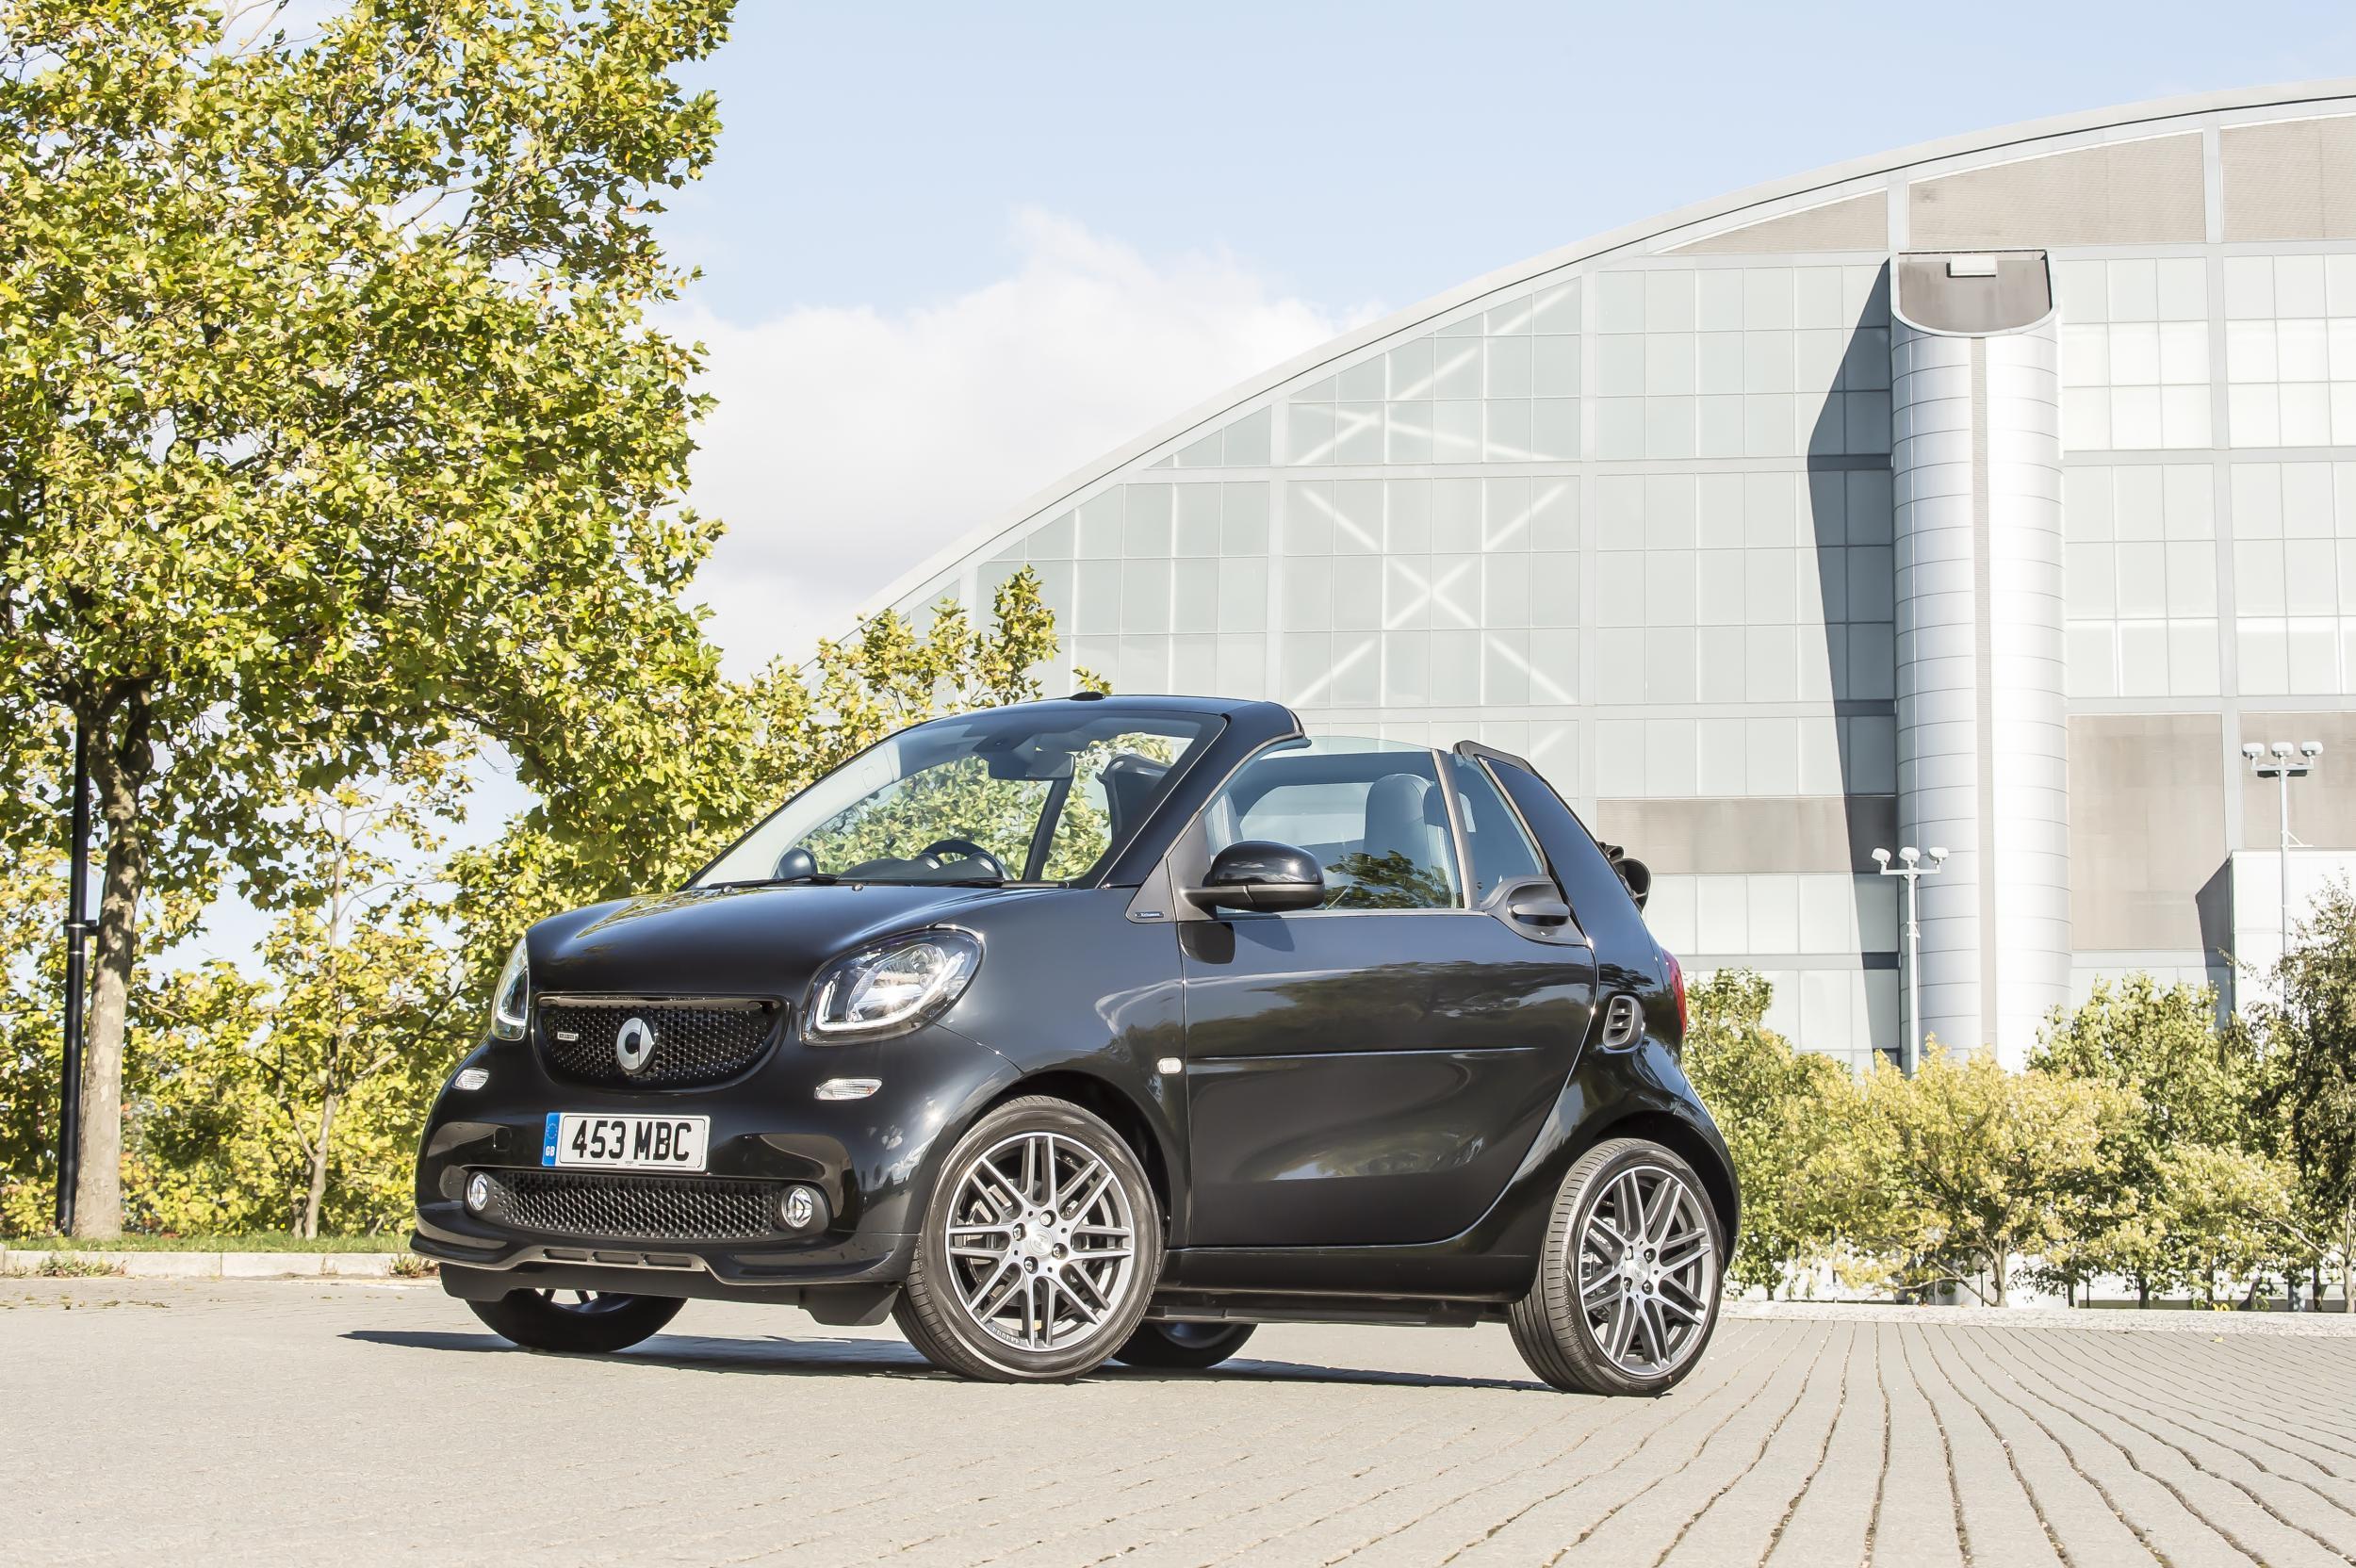 https://static.independent.co.uk/s3fs-public/thumbnails/image/2017/07/31/15/smart-fortwo-cabrio-brabus-f34.jpg